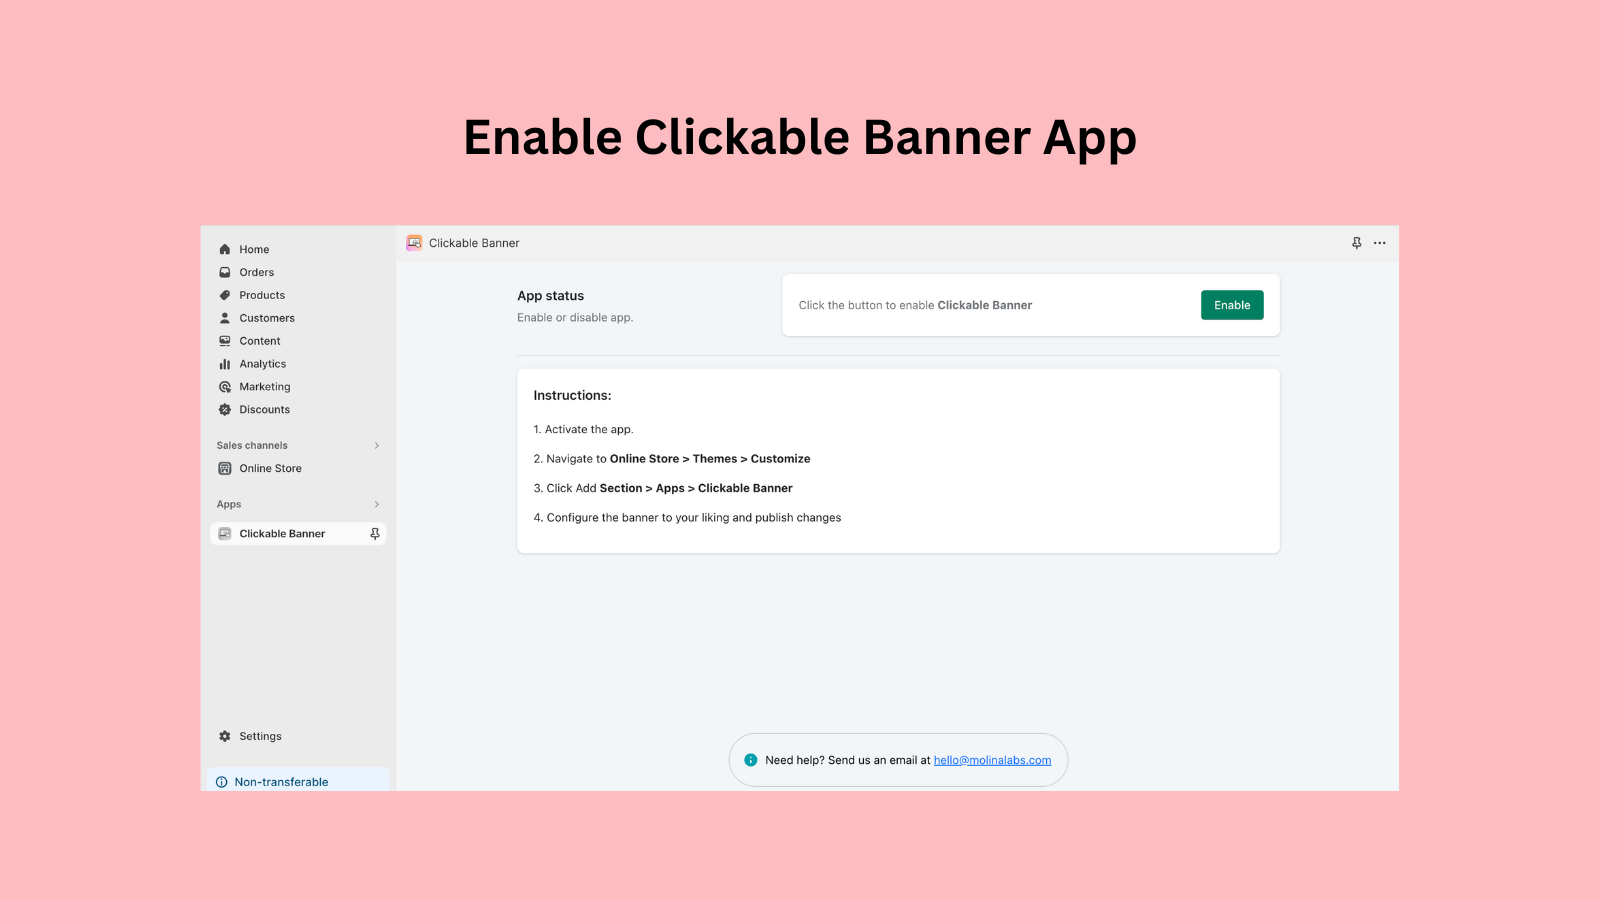 Enable Clickable Banner App